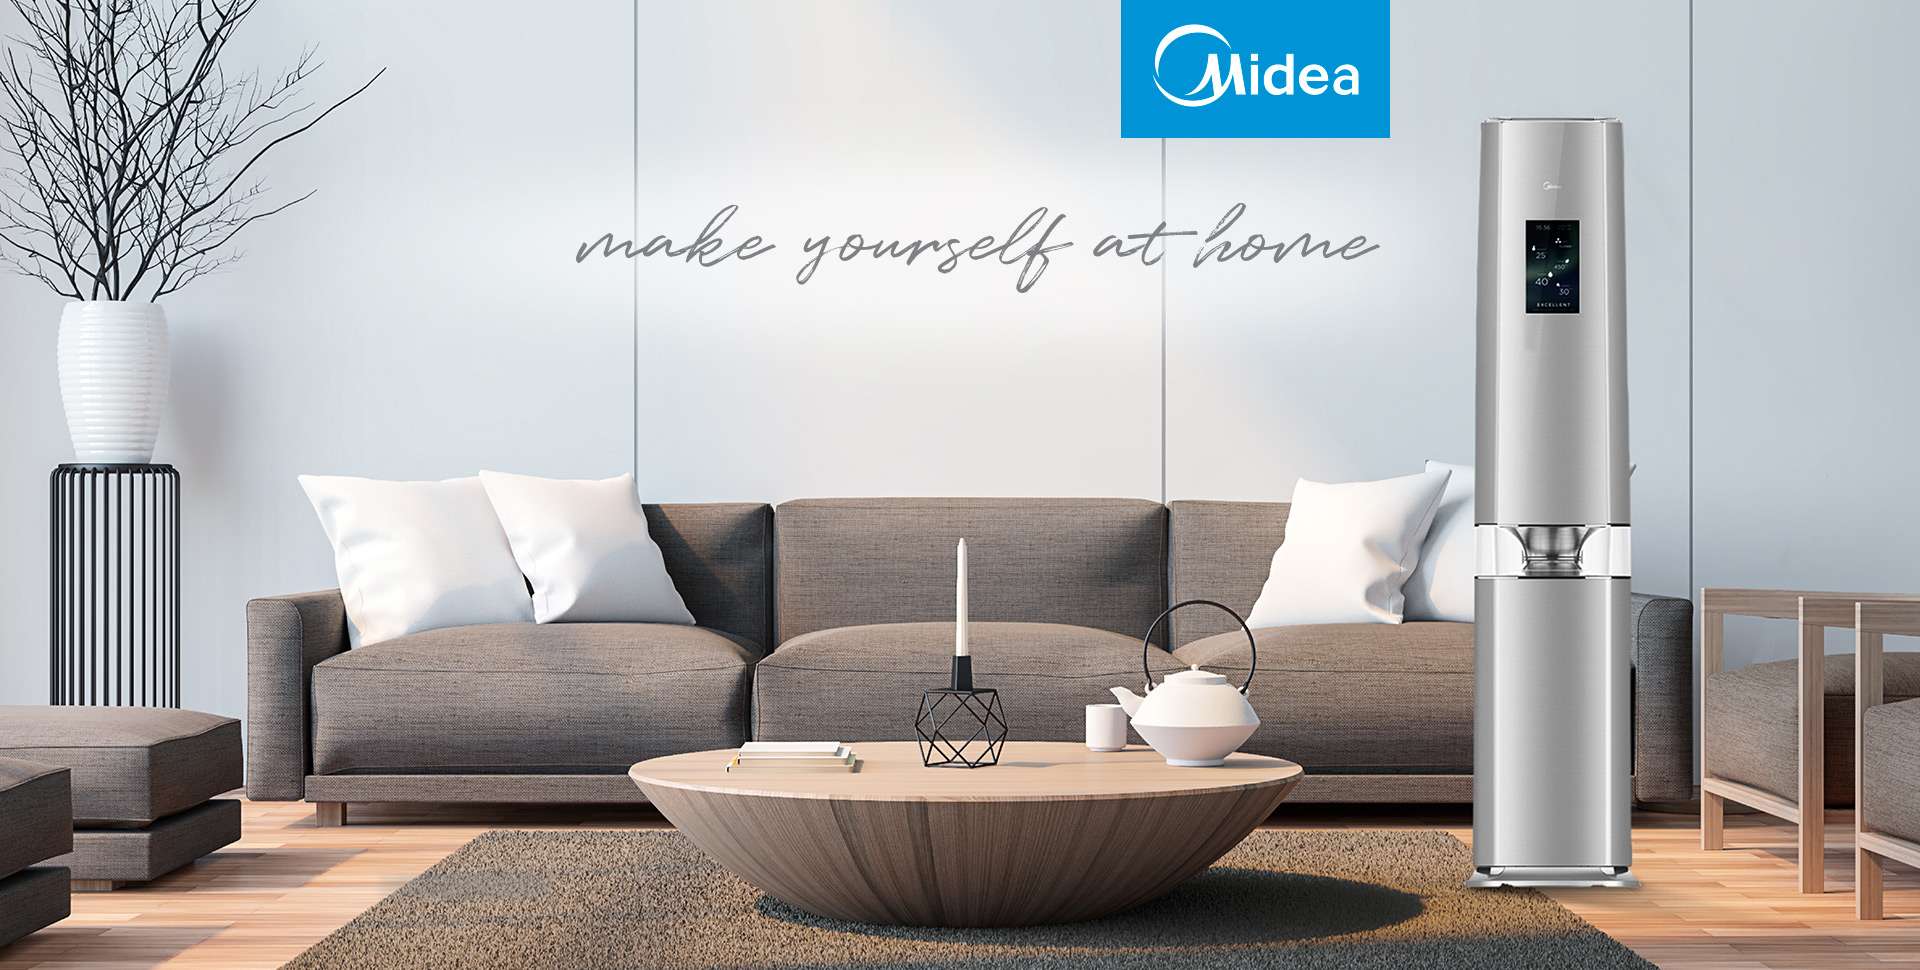 Midea - Make yourself at Home - World's Number 1 Appliance Producer